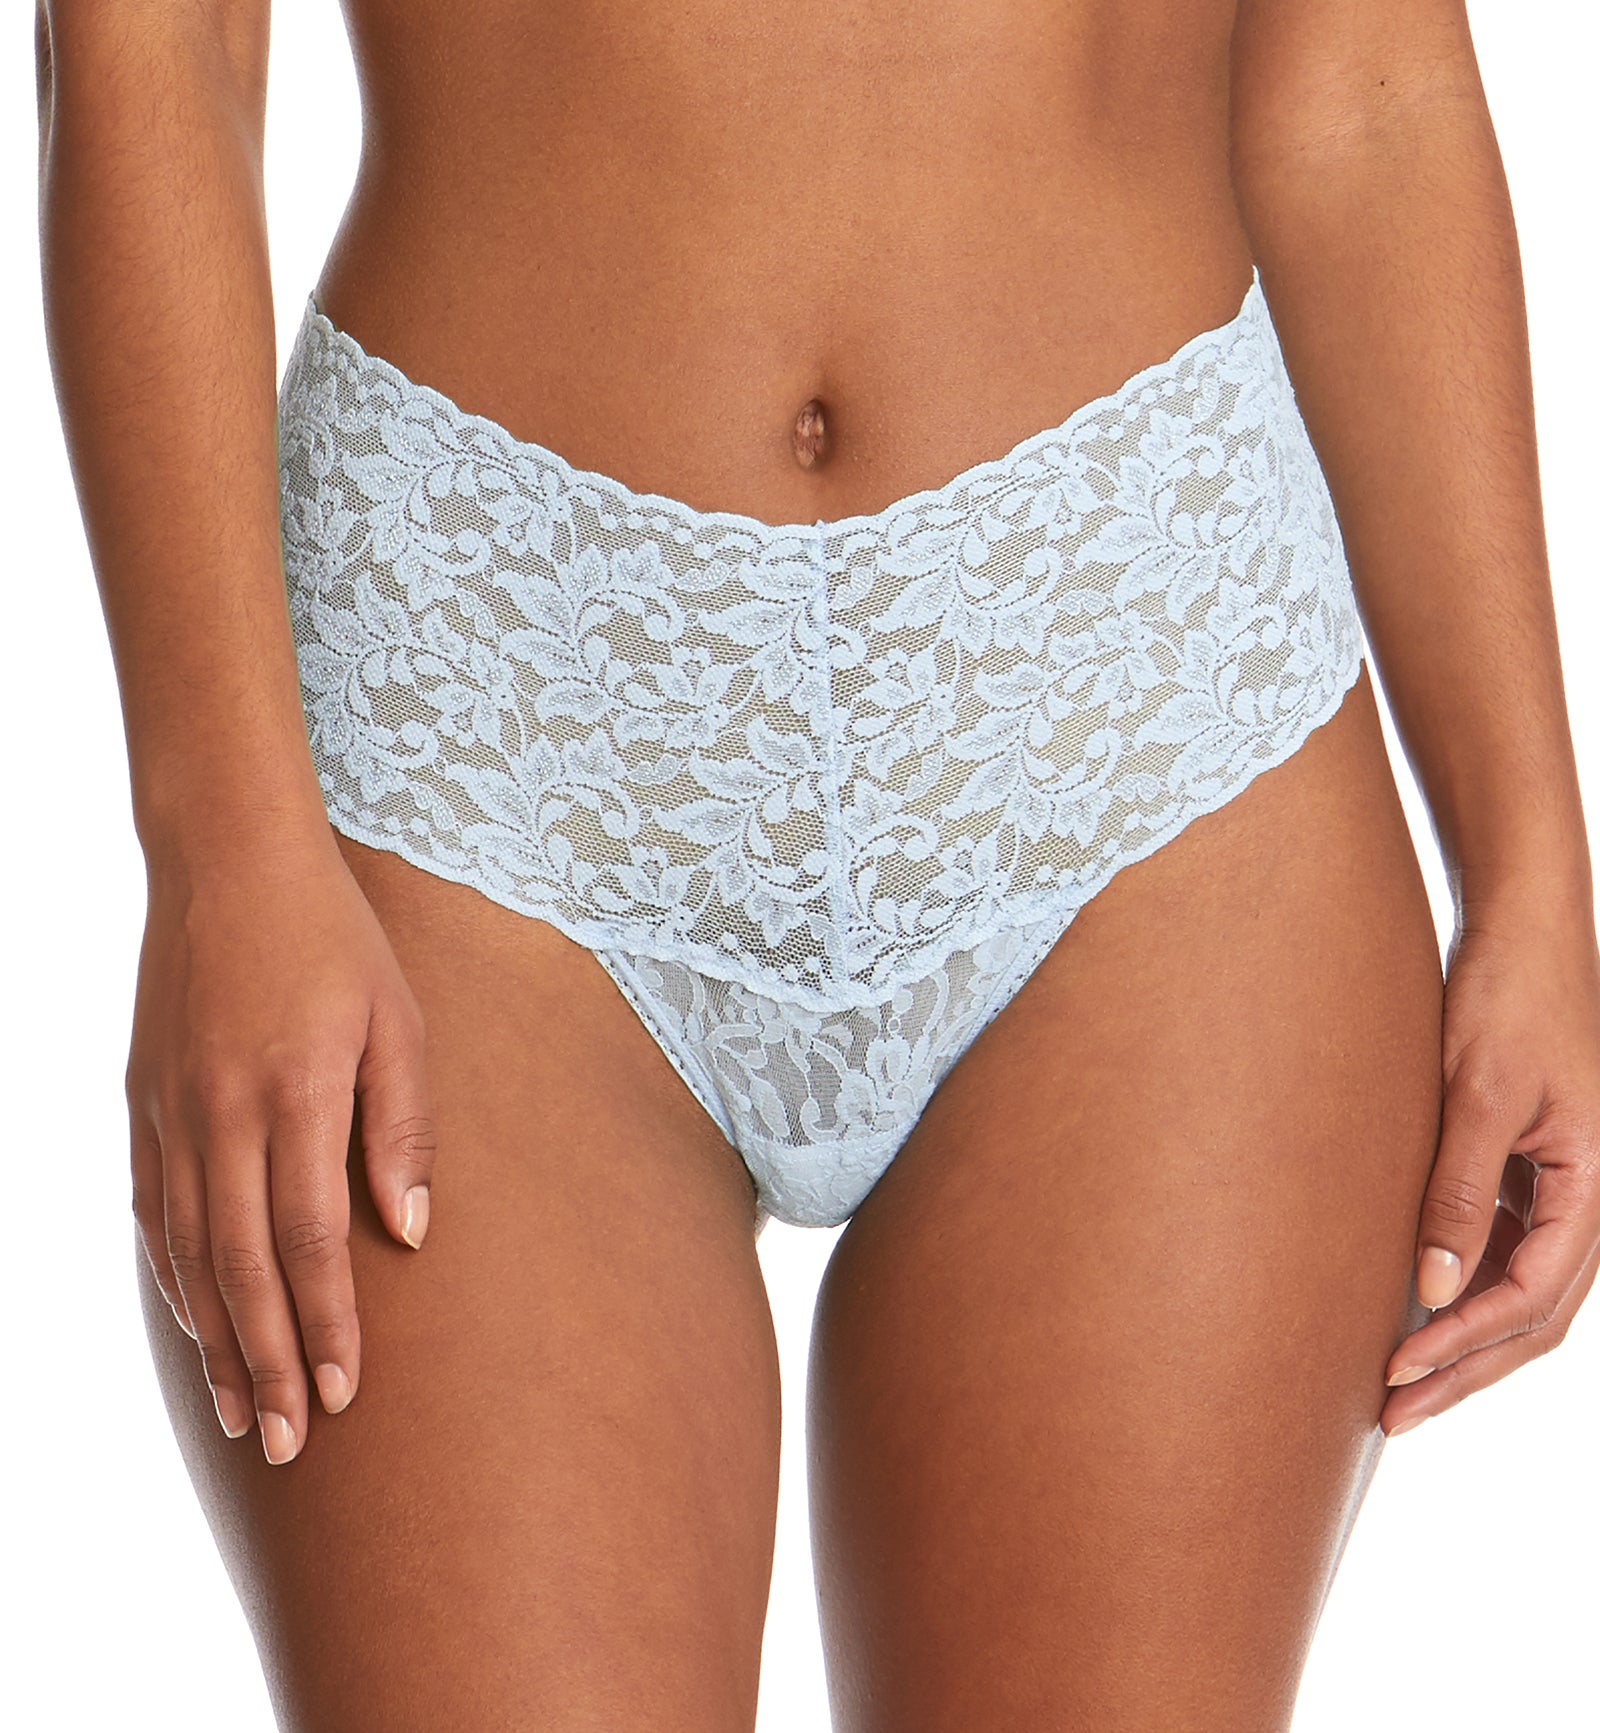 Hanky Panky Retro Lace Thong (9K1926P),Partly Cloudy - Partly Cloudy,One Size